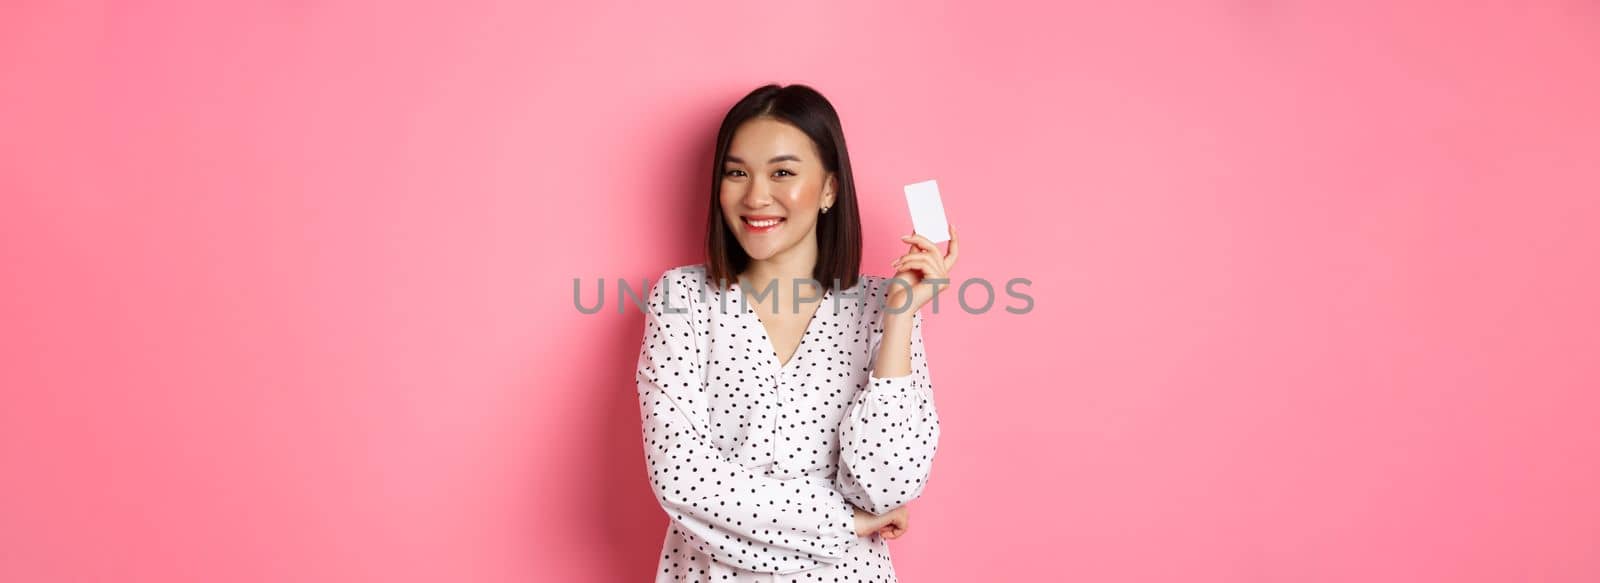 Shopping concept. Confident and happy asian woman holding credit card and smiling satisfied, standing against pink background.